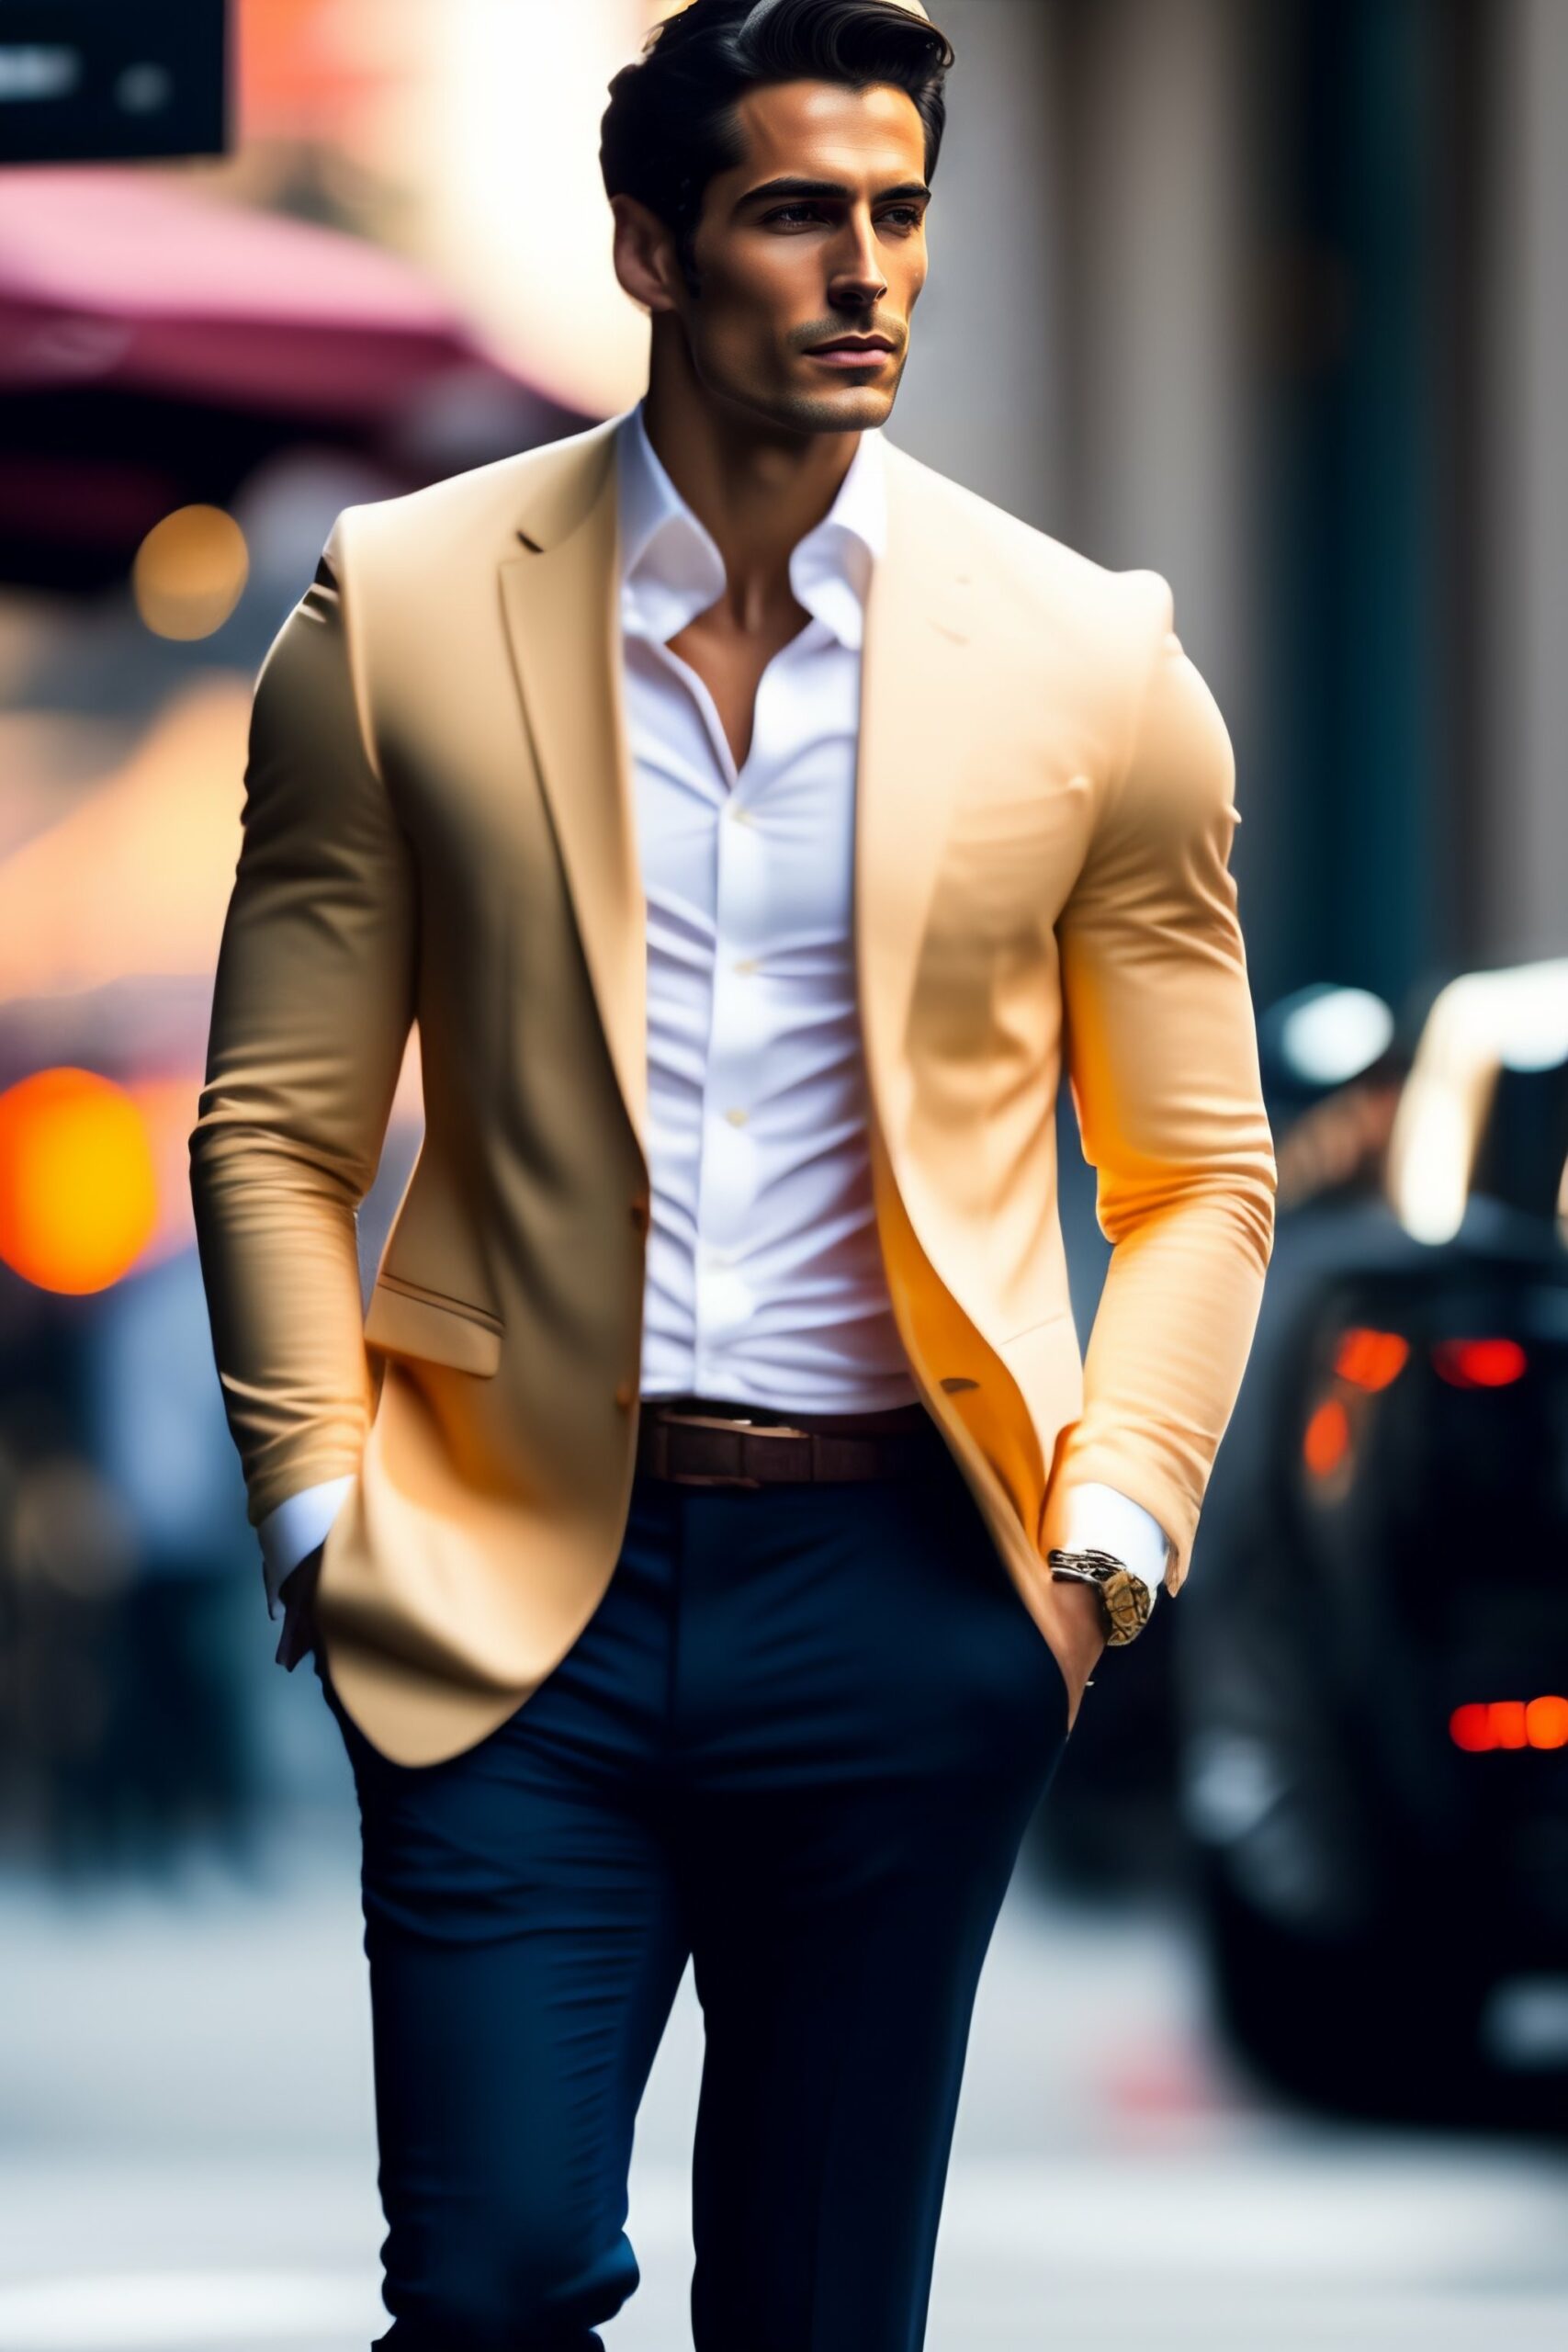 The Best Clothing for Men: A Guide to Looking Sharp